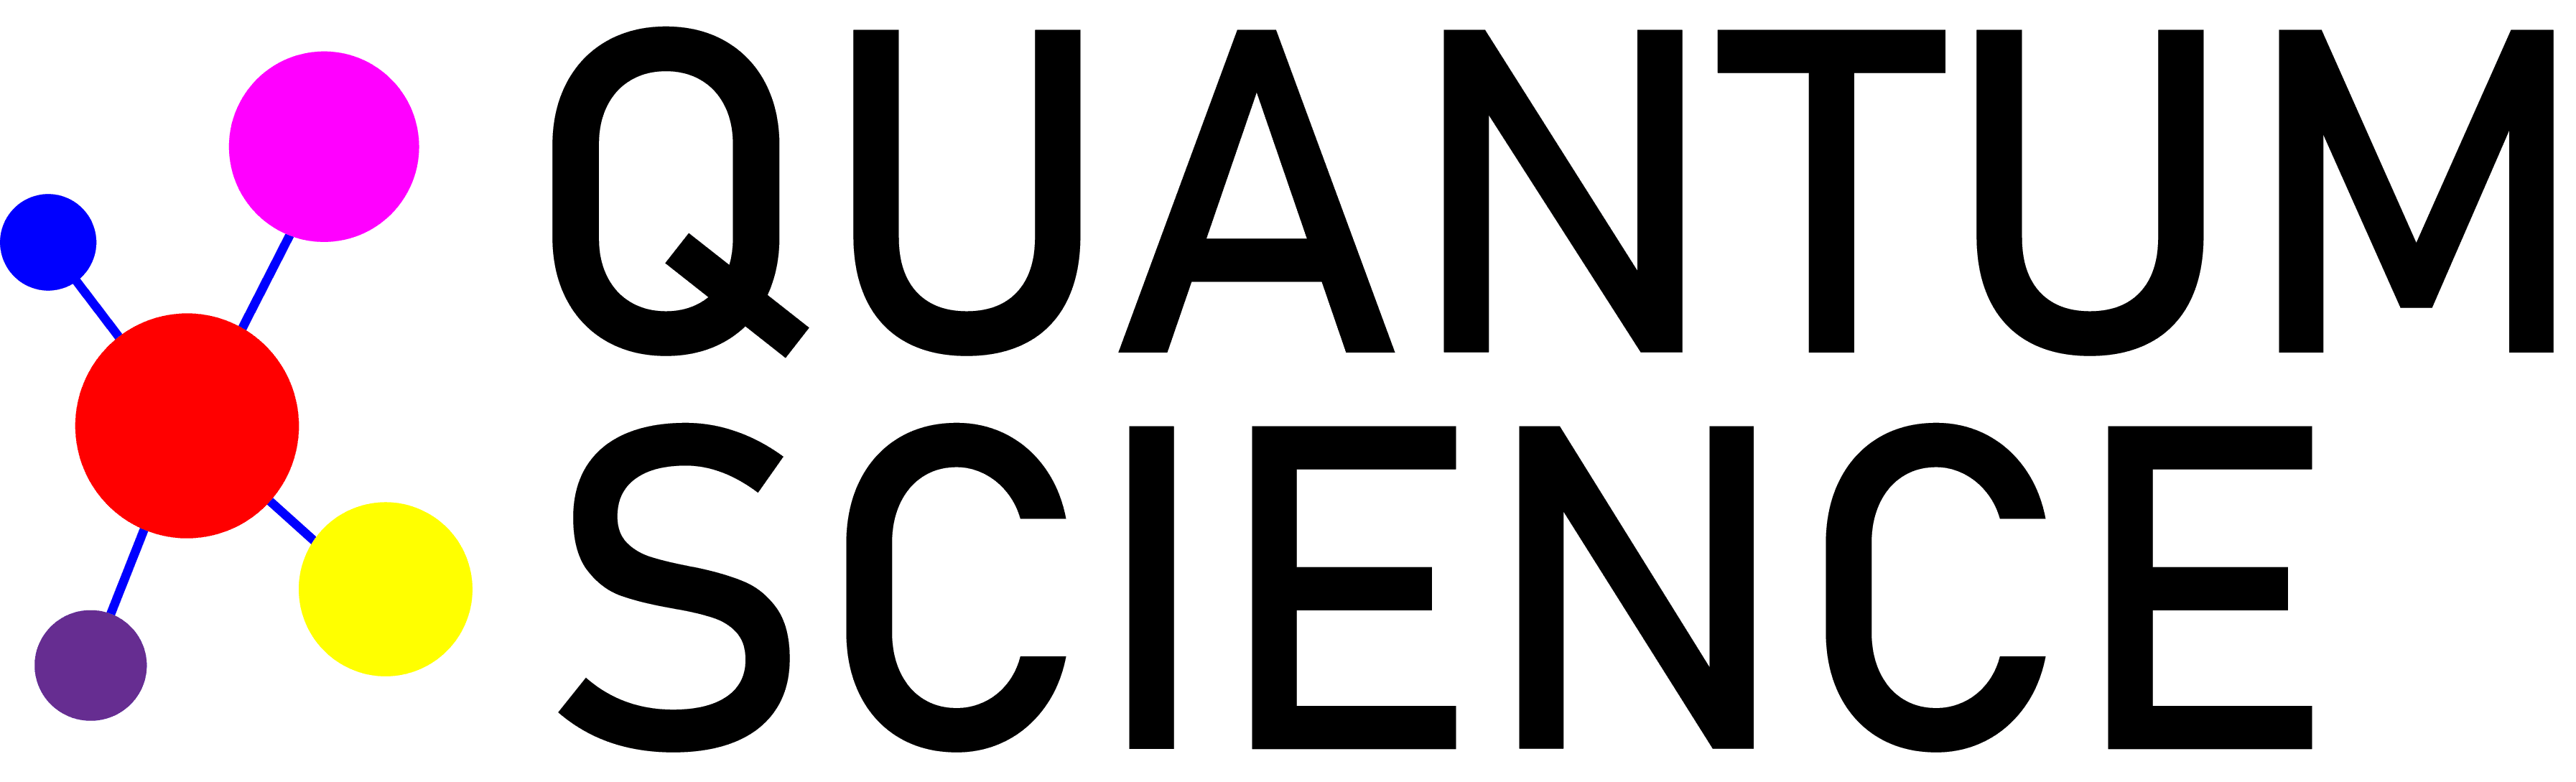 Product Quantum Science partnership puts academic expertise at the heart of cutting-edge nanomaterials research - Quantum Science Ltd image